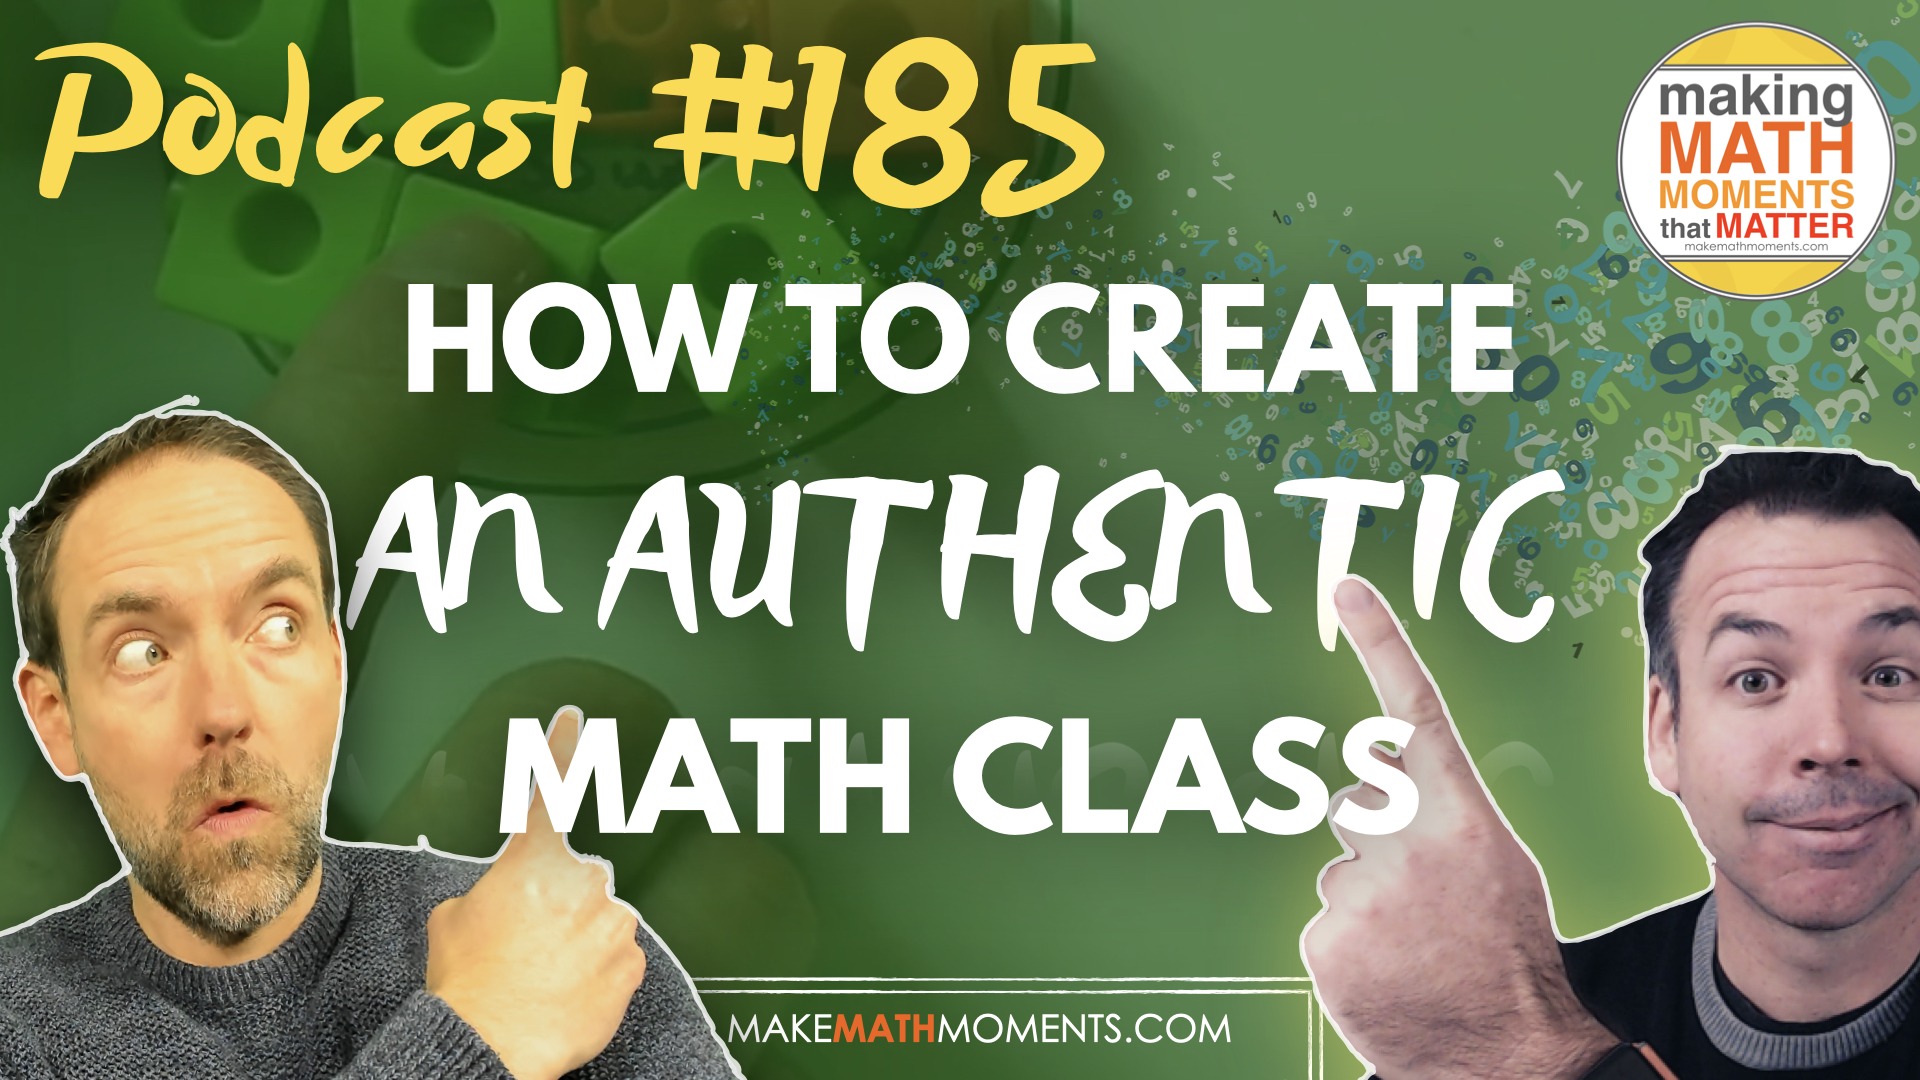 Episode #185: How To Create An Authentic Math Class